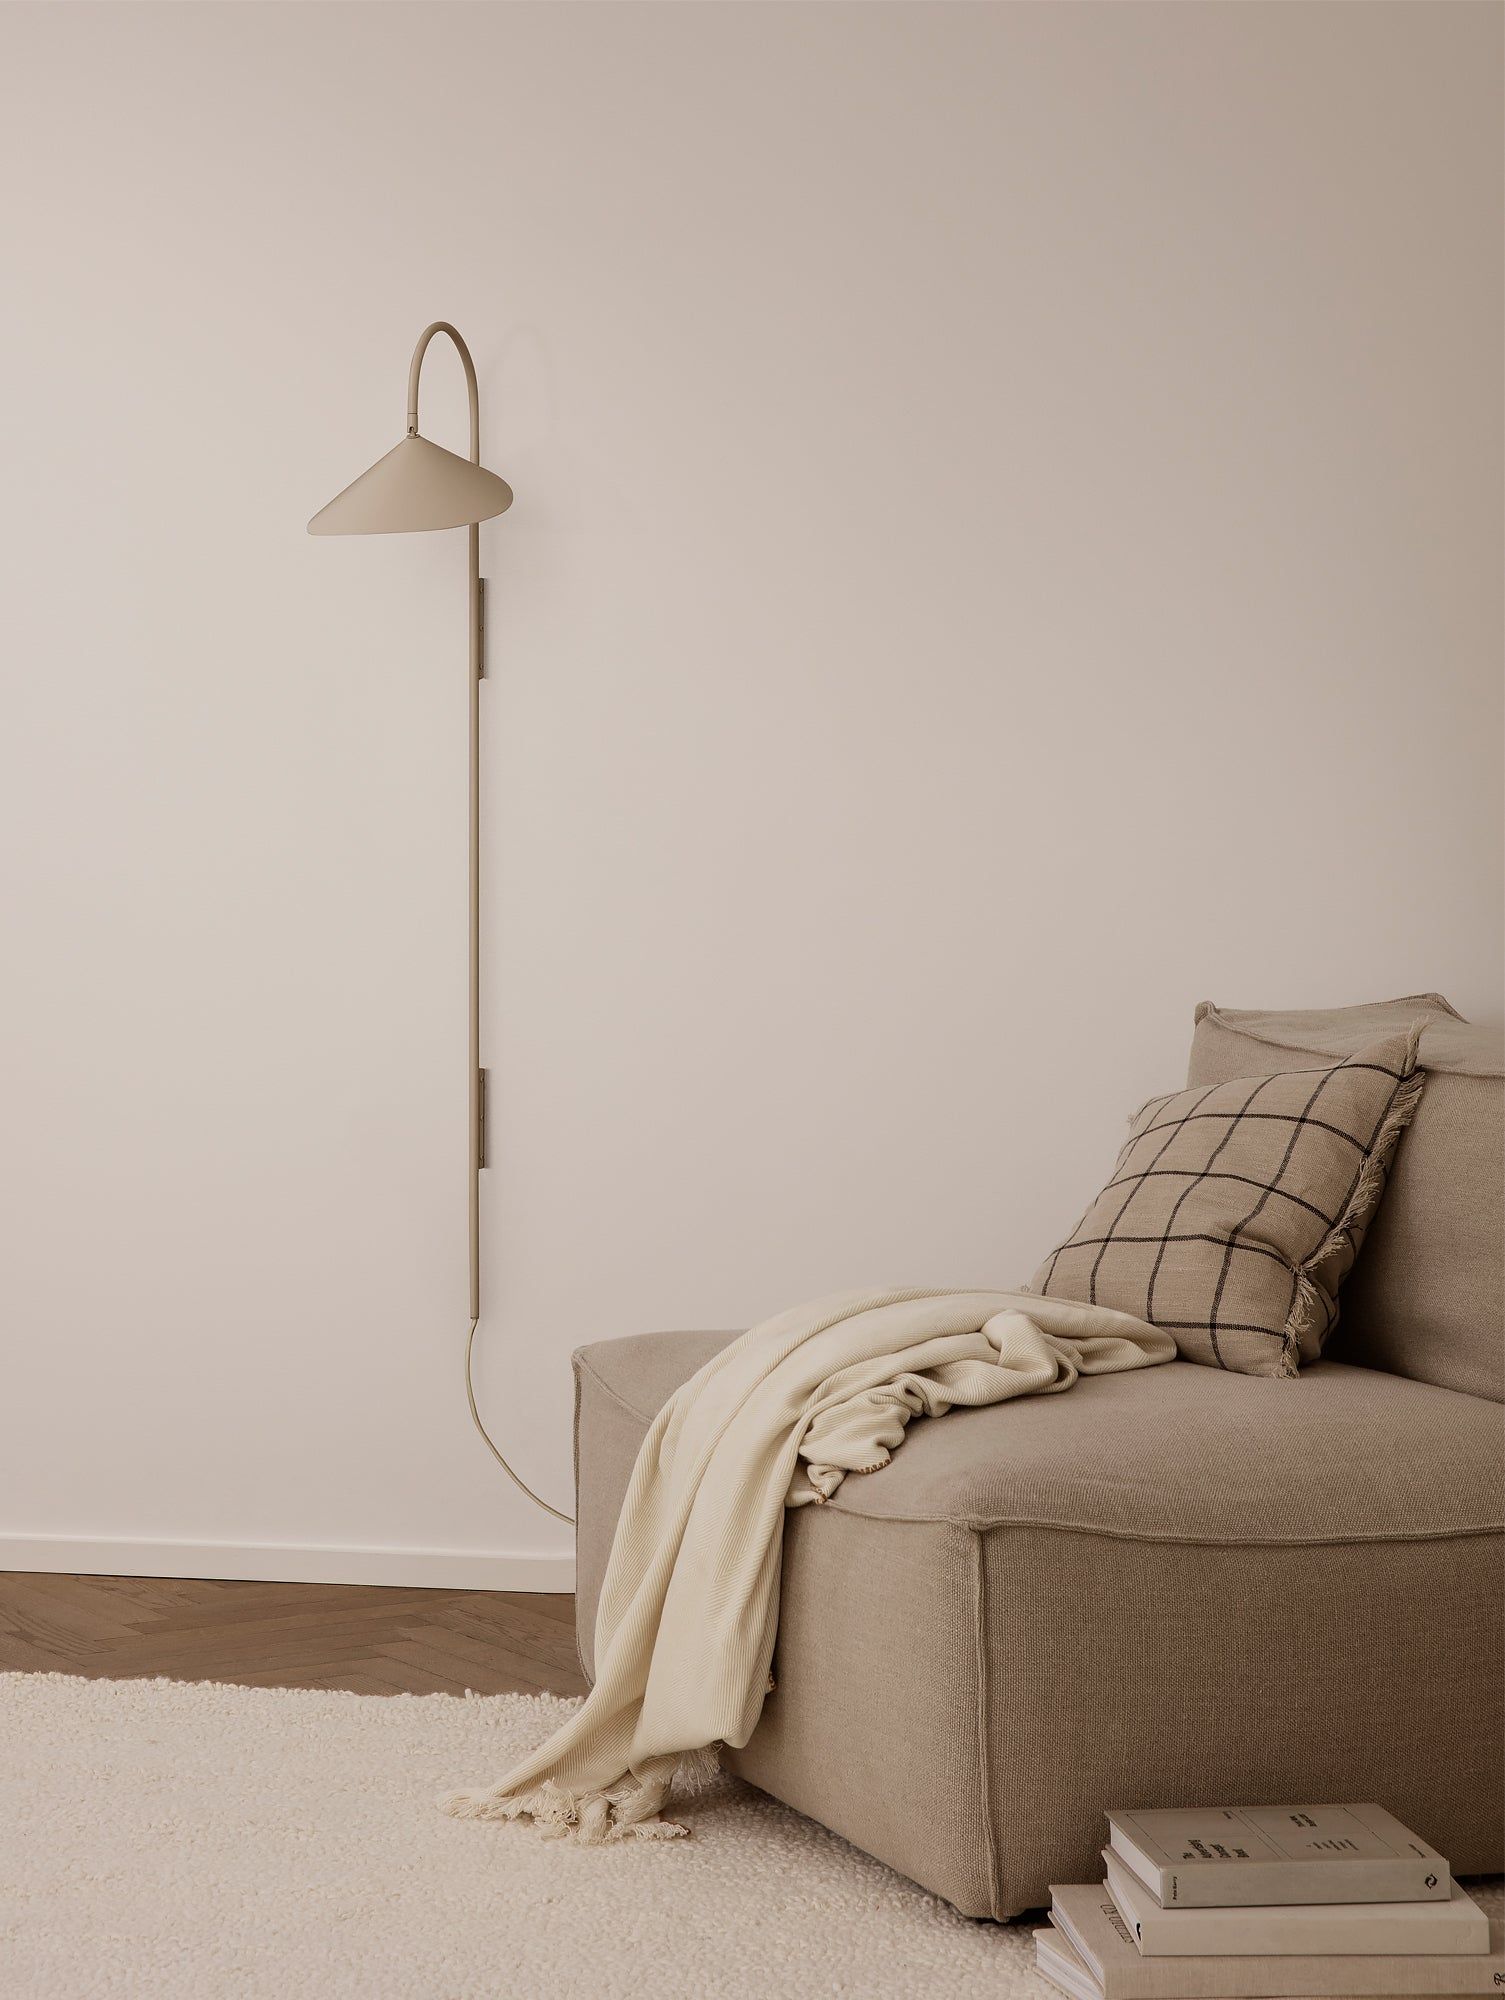 Elegant and Chic Floor Lamp for Your Home